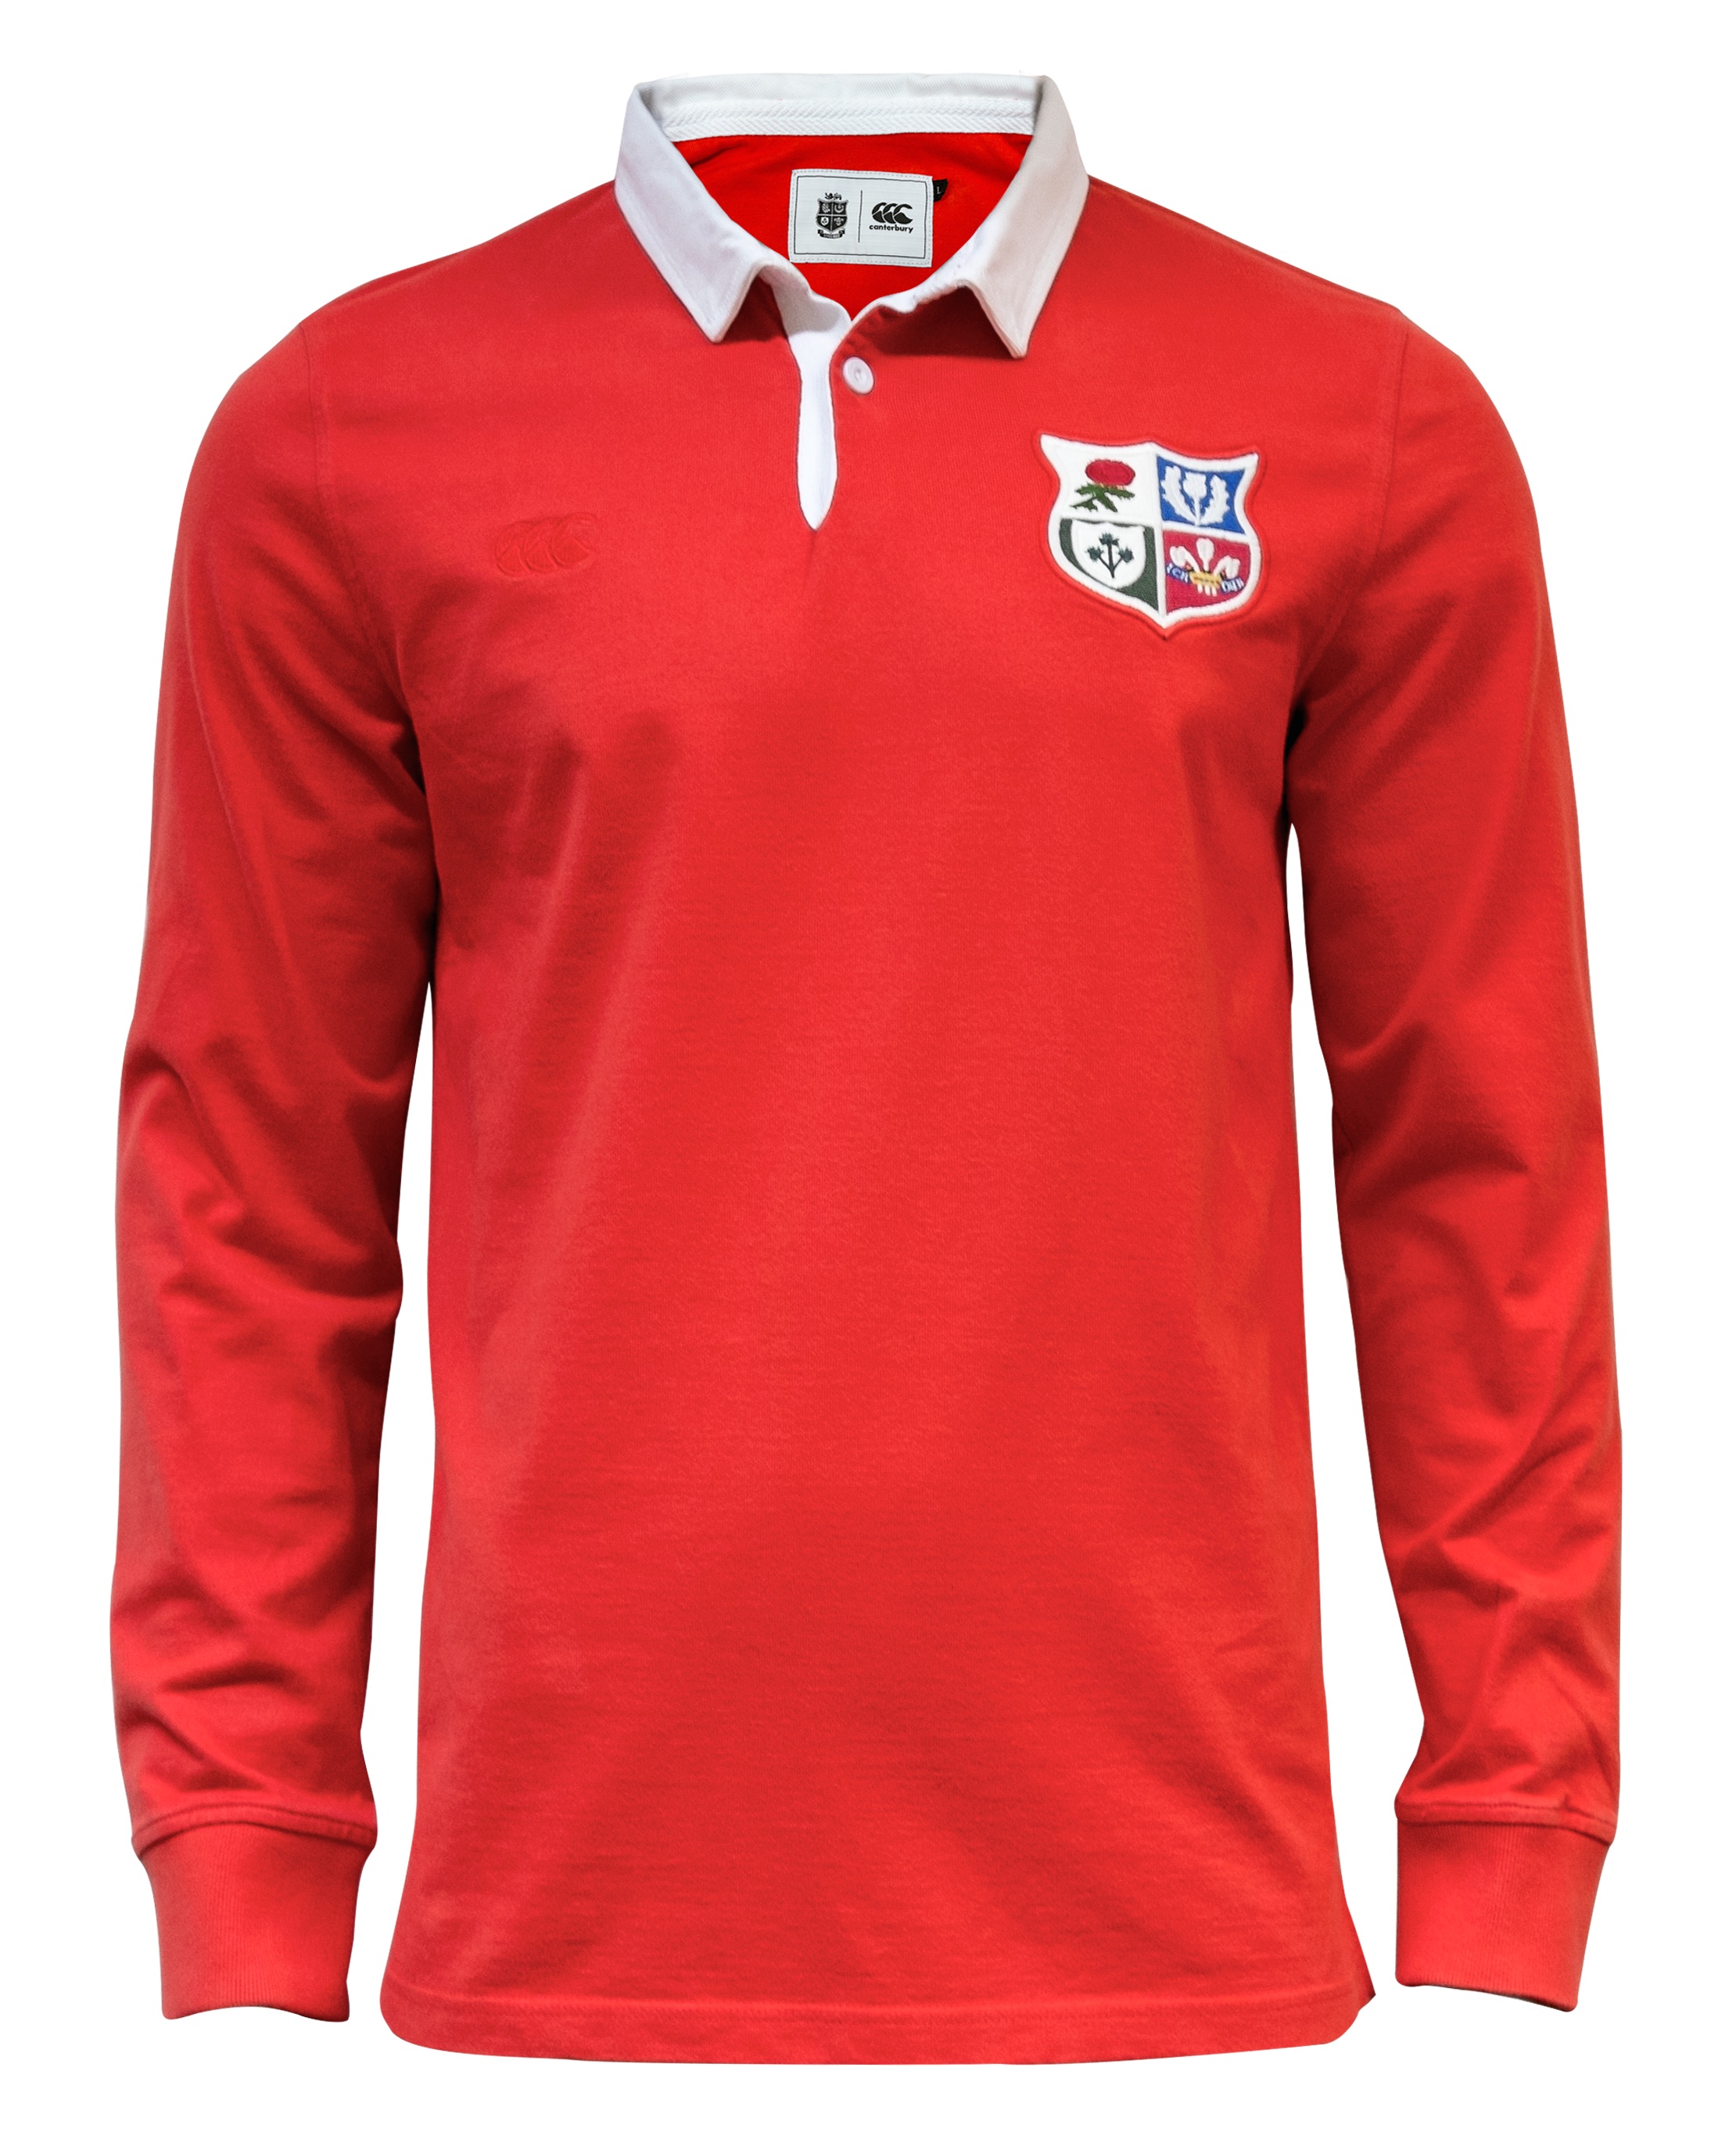 lions rugby shirt